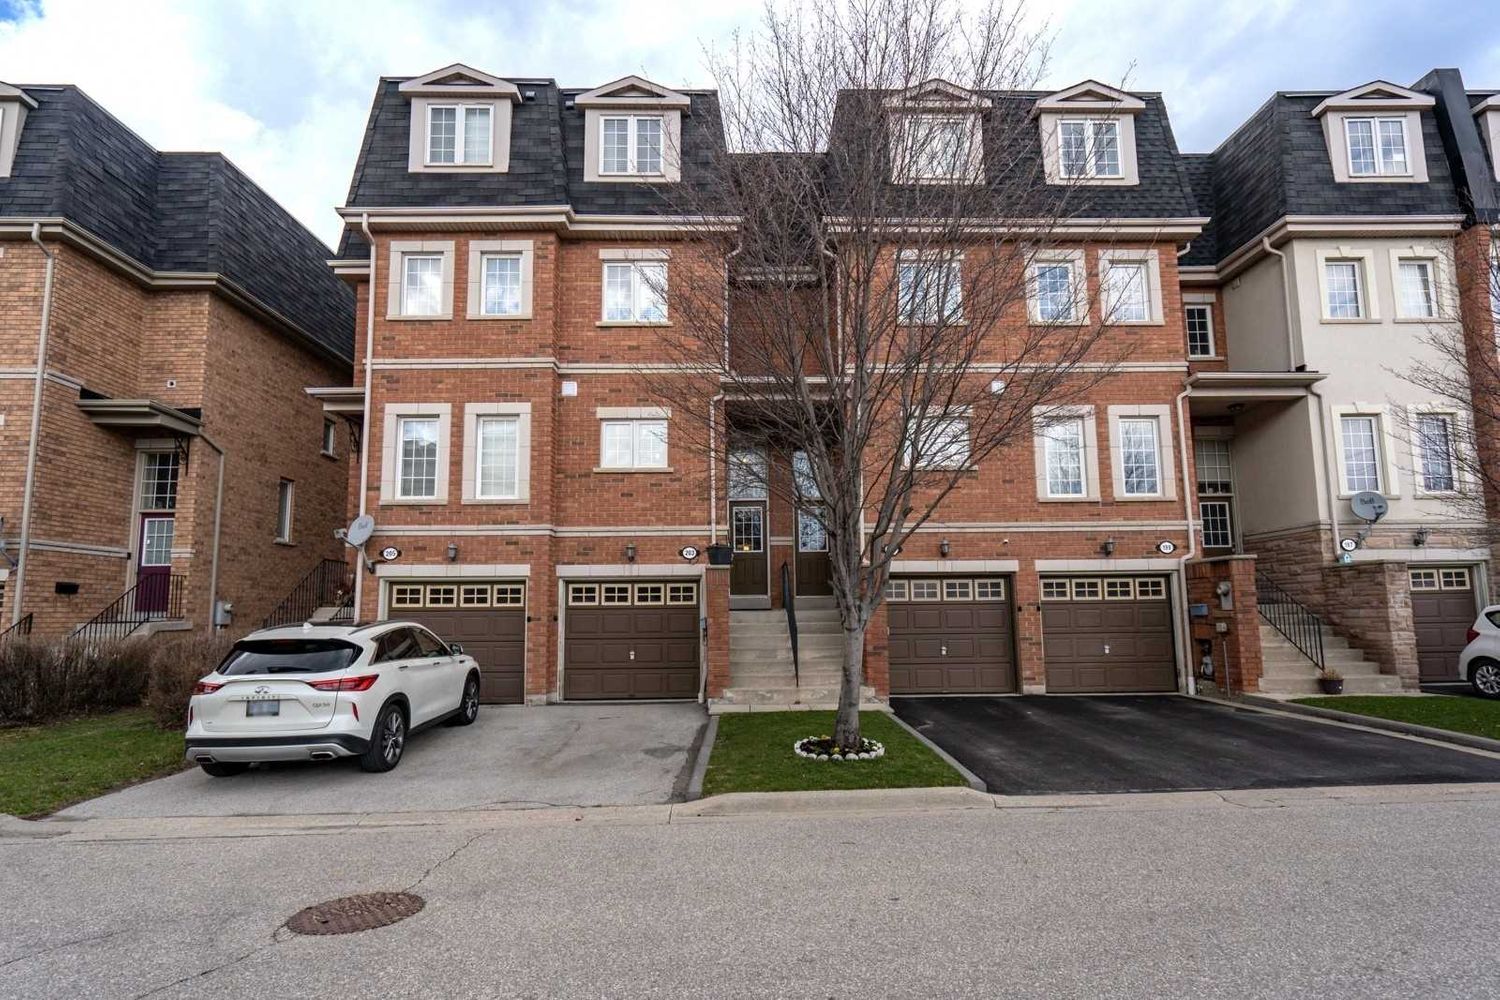 435 Hensall Cir. 435 Hensall Circ Townhomes is located in  Mississauga, Toronto - image #2 of 2